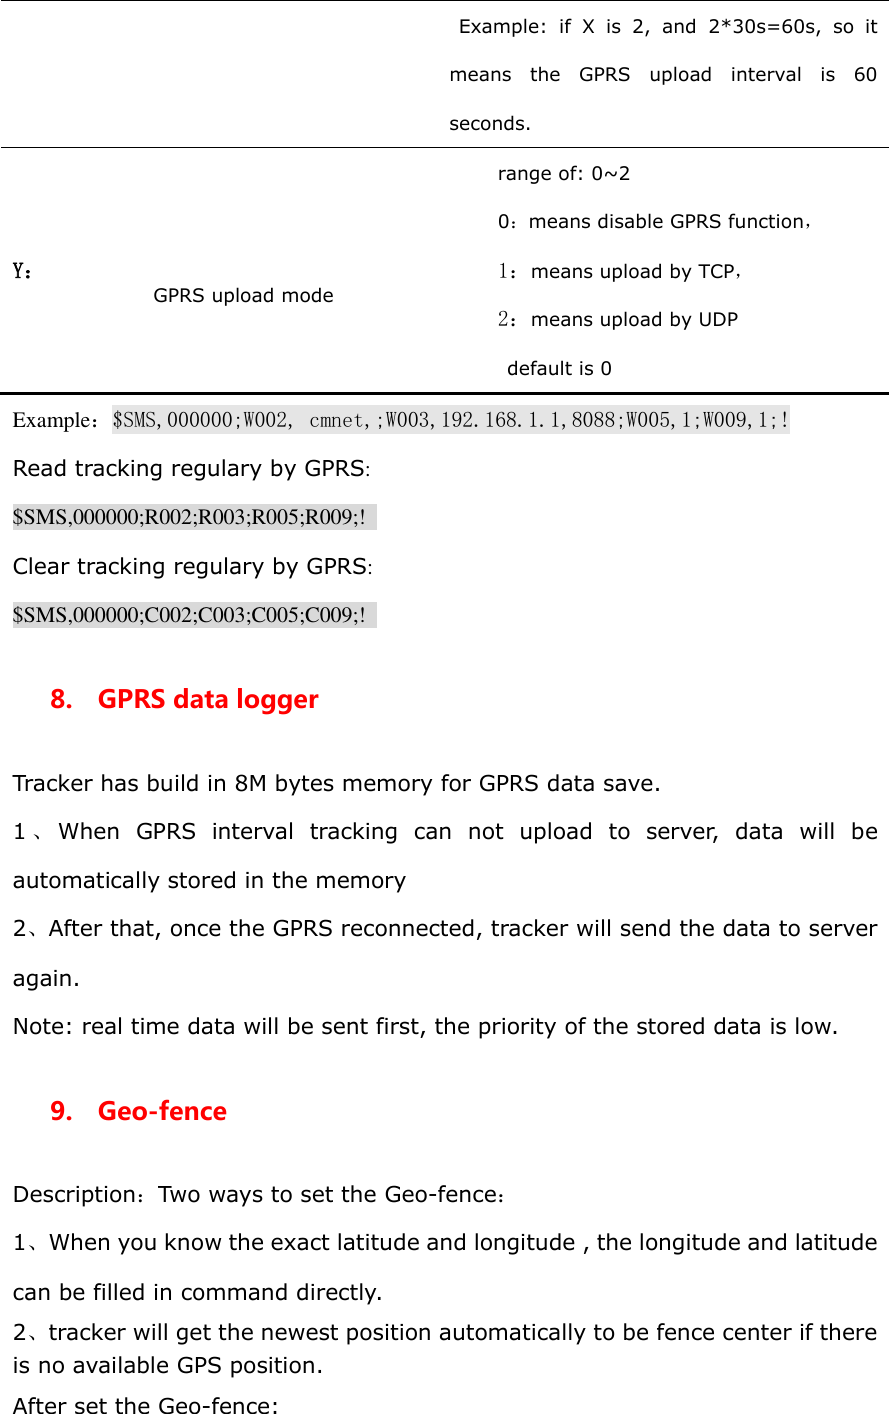 Example:  if  X  is  2,  and  2*30s=60s,  so  it means  the  GPRS  upload  interval  is  60 seconds. Y：   GPRS upload mode  range of: 0~2 0：means disable GPRS function， 1：means upload by TCP， 2：means upload by UDP default is 0 Example：$SMS,000000;W002, cmnet,;W003,192.168.1.1,8088;W005,1;W009,1;! Read tracking regulary by GPRS: $SMS,000000;R002;R003;R005;R009;!   Clear tracking regulary by GPRS: $SMS,000000;C002;C003;C005;C009;!   8.    GPRS data logger Tracker has build in 8M bytes memory for GPRS data save. 1、When  GPRS  interval  tracking  can  not  upload  to  server,  data  will  be automatically stored in the memory 2、After that, once the GPRS reconnected, tracker will send the data to server again. Note: real time data will be sent first, the priority of the stored data is low. 9.  Geo-fence Description：Two ways to set the Geo-fence： 1、When you know the exact latitude and longitude , the longitude and latitude can be filled in command directly. 2、tracker will get the newest position automatically to be fence center if there is no available GPS position. After set the Geo-fence: 